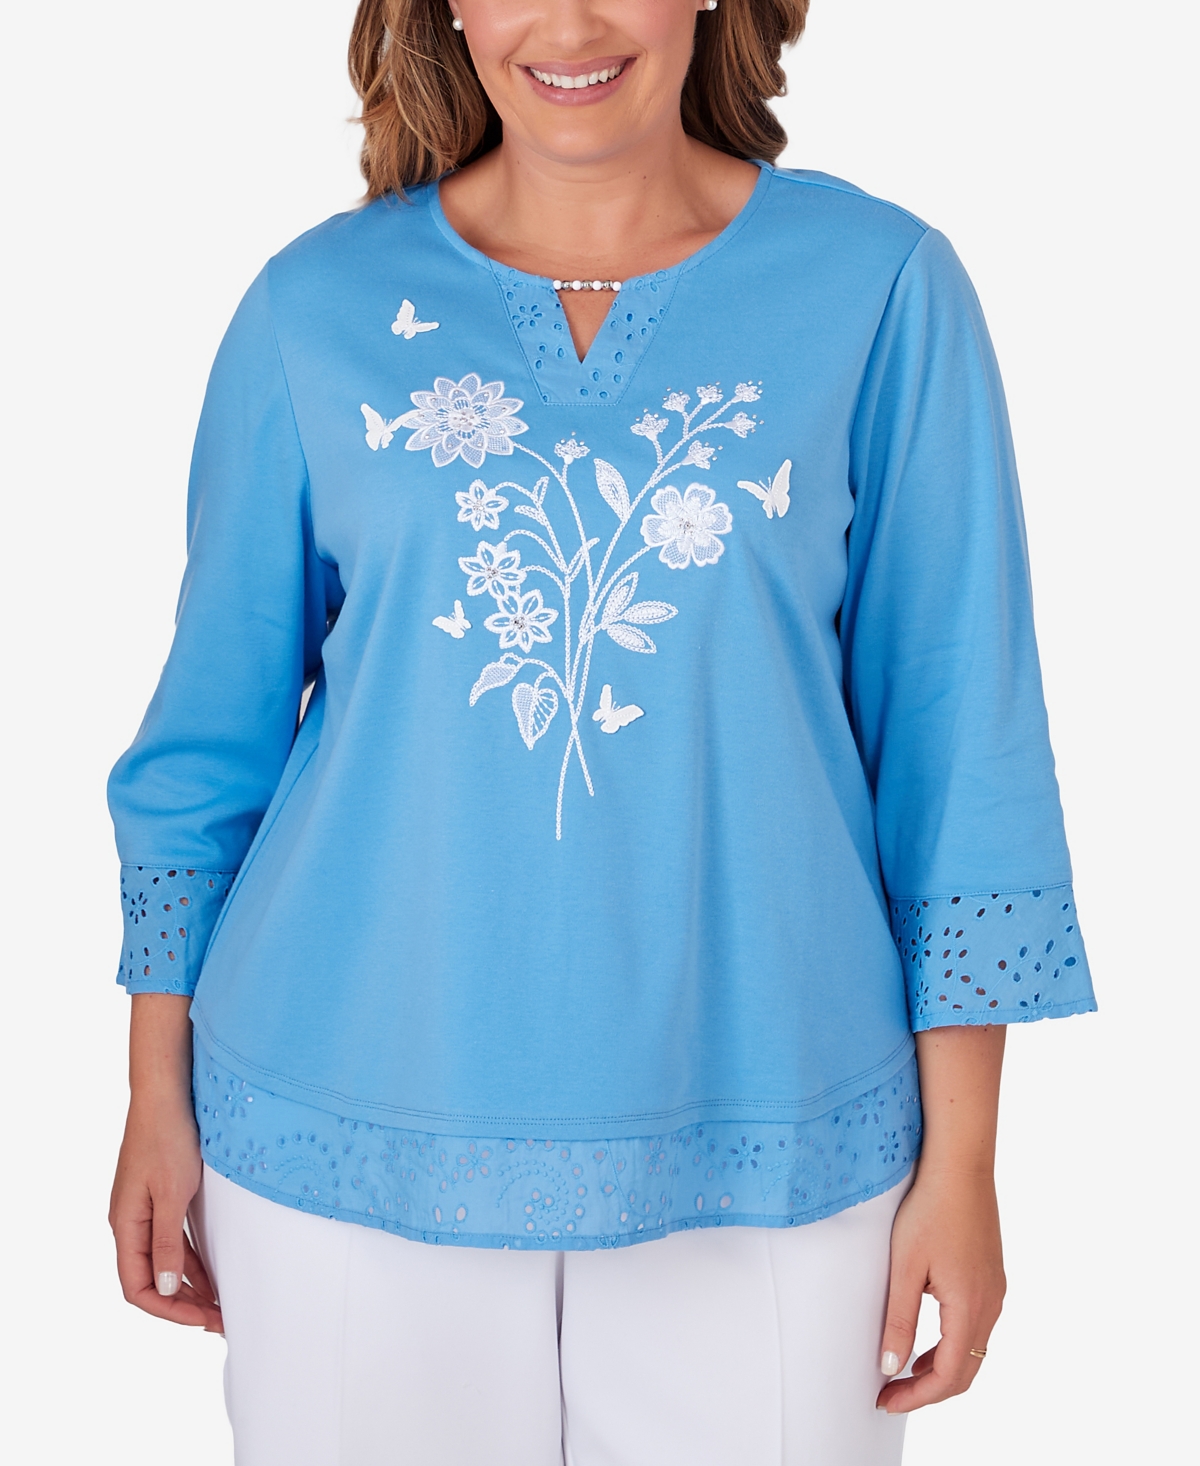 ALFRED DUNNER PLUS SIZE PARADISE ISLAND FLORAL EMBROIDERY TOP WITH EYELET DETAILS